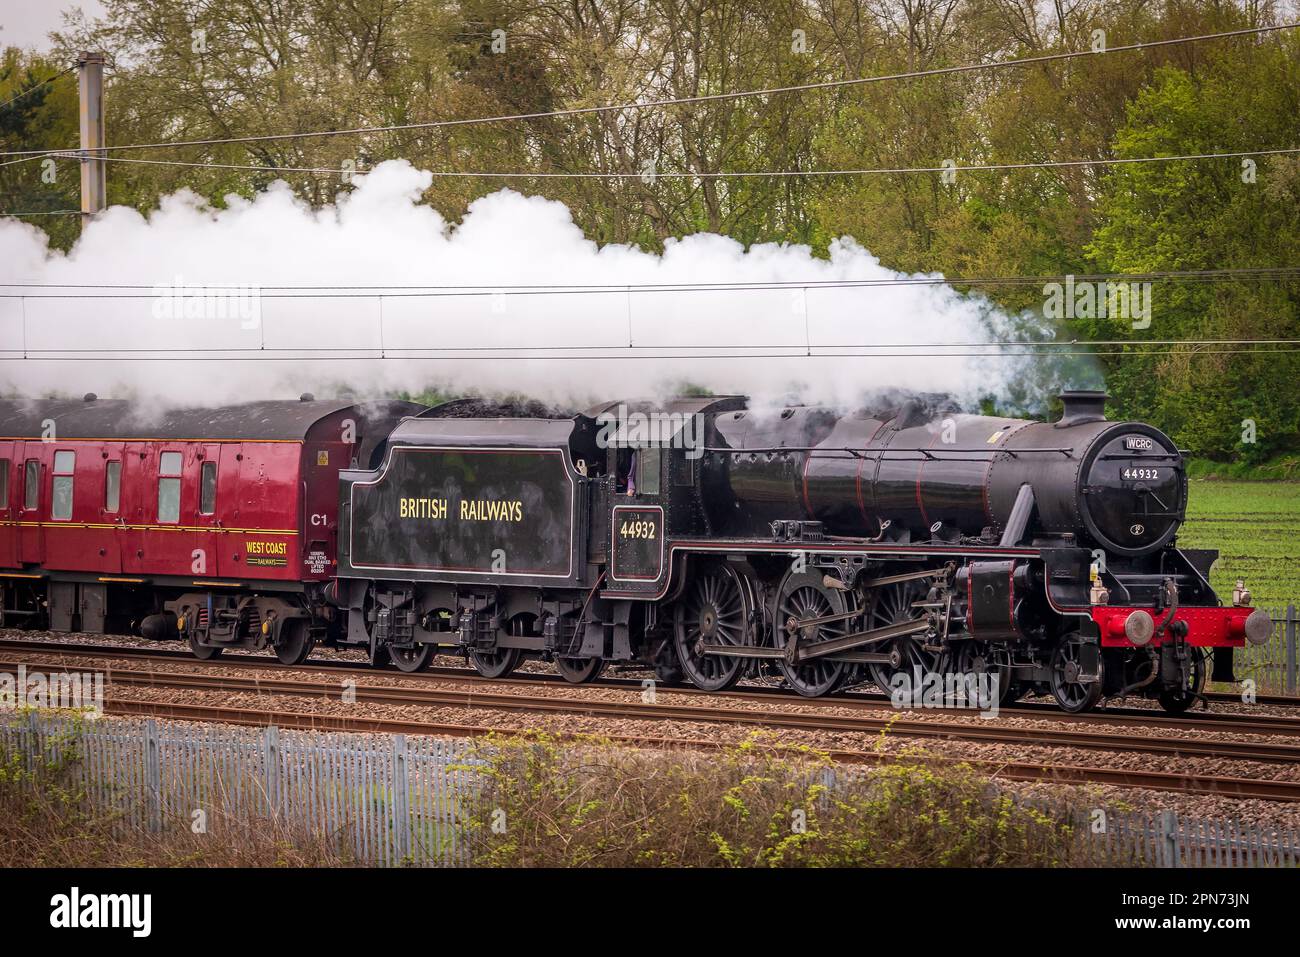 Black Five Stanier locomotive number 44932 at speed on the West Coast Main Line. Stock Photo